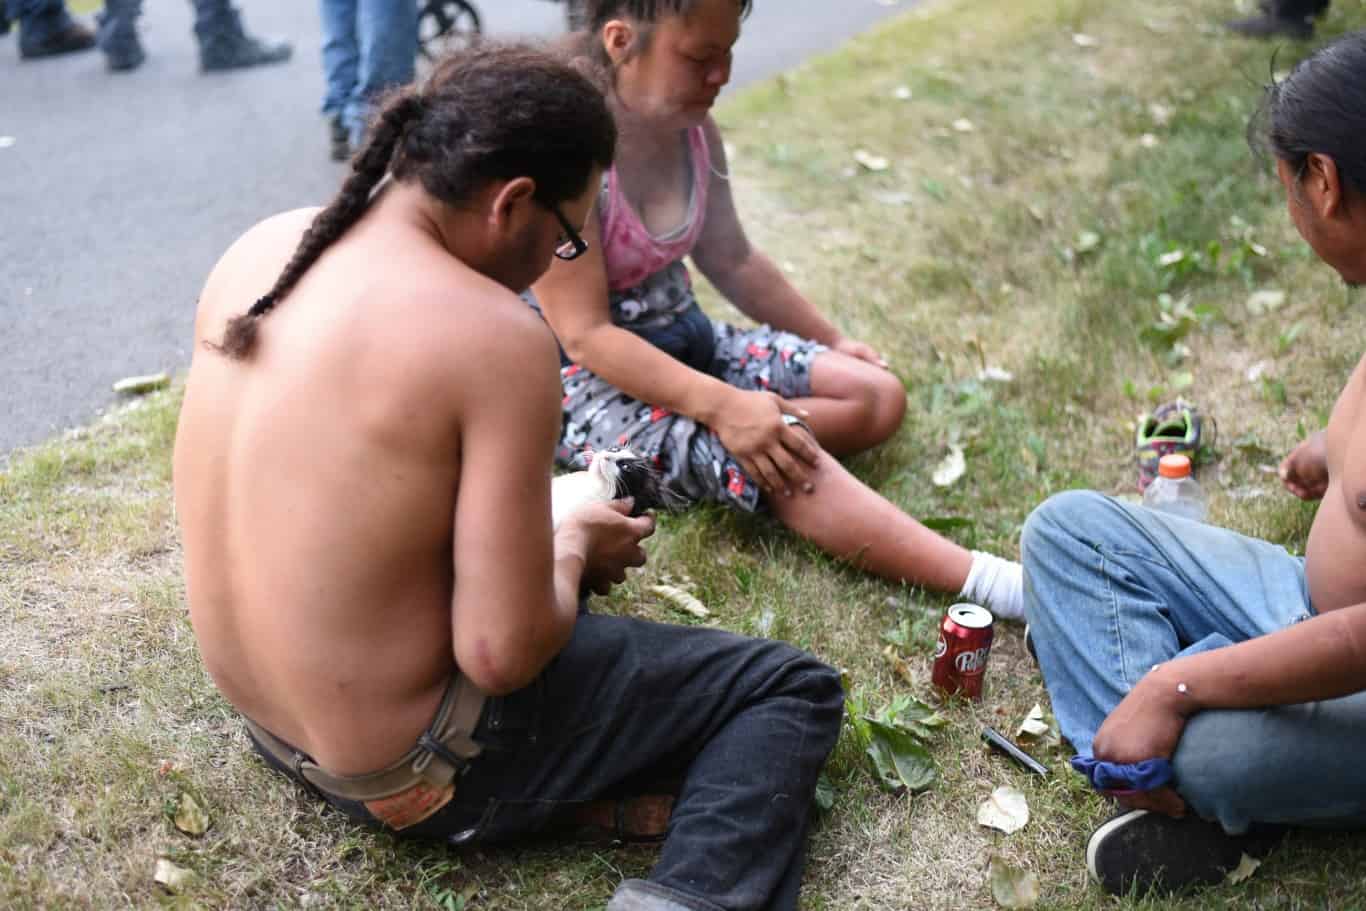 Alaska+homeless | Camp Here : Occupy to Overcome protest in support of homeless individuals. July 2019